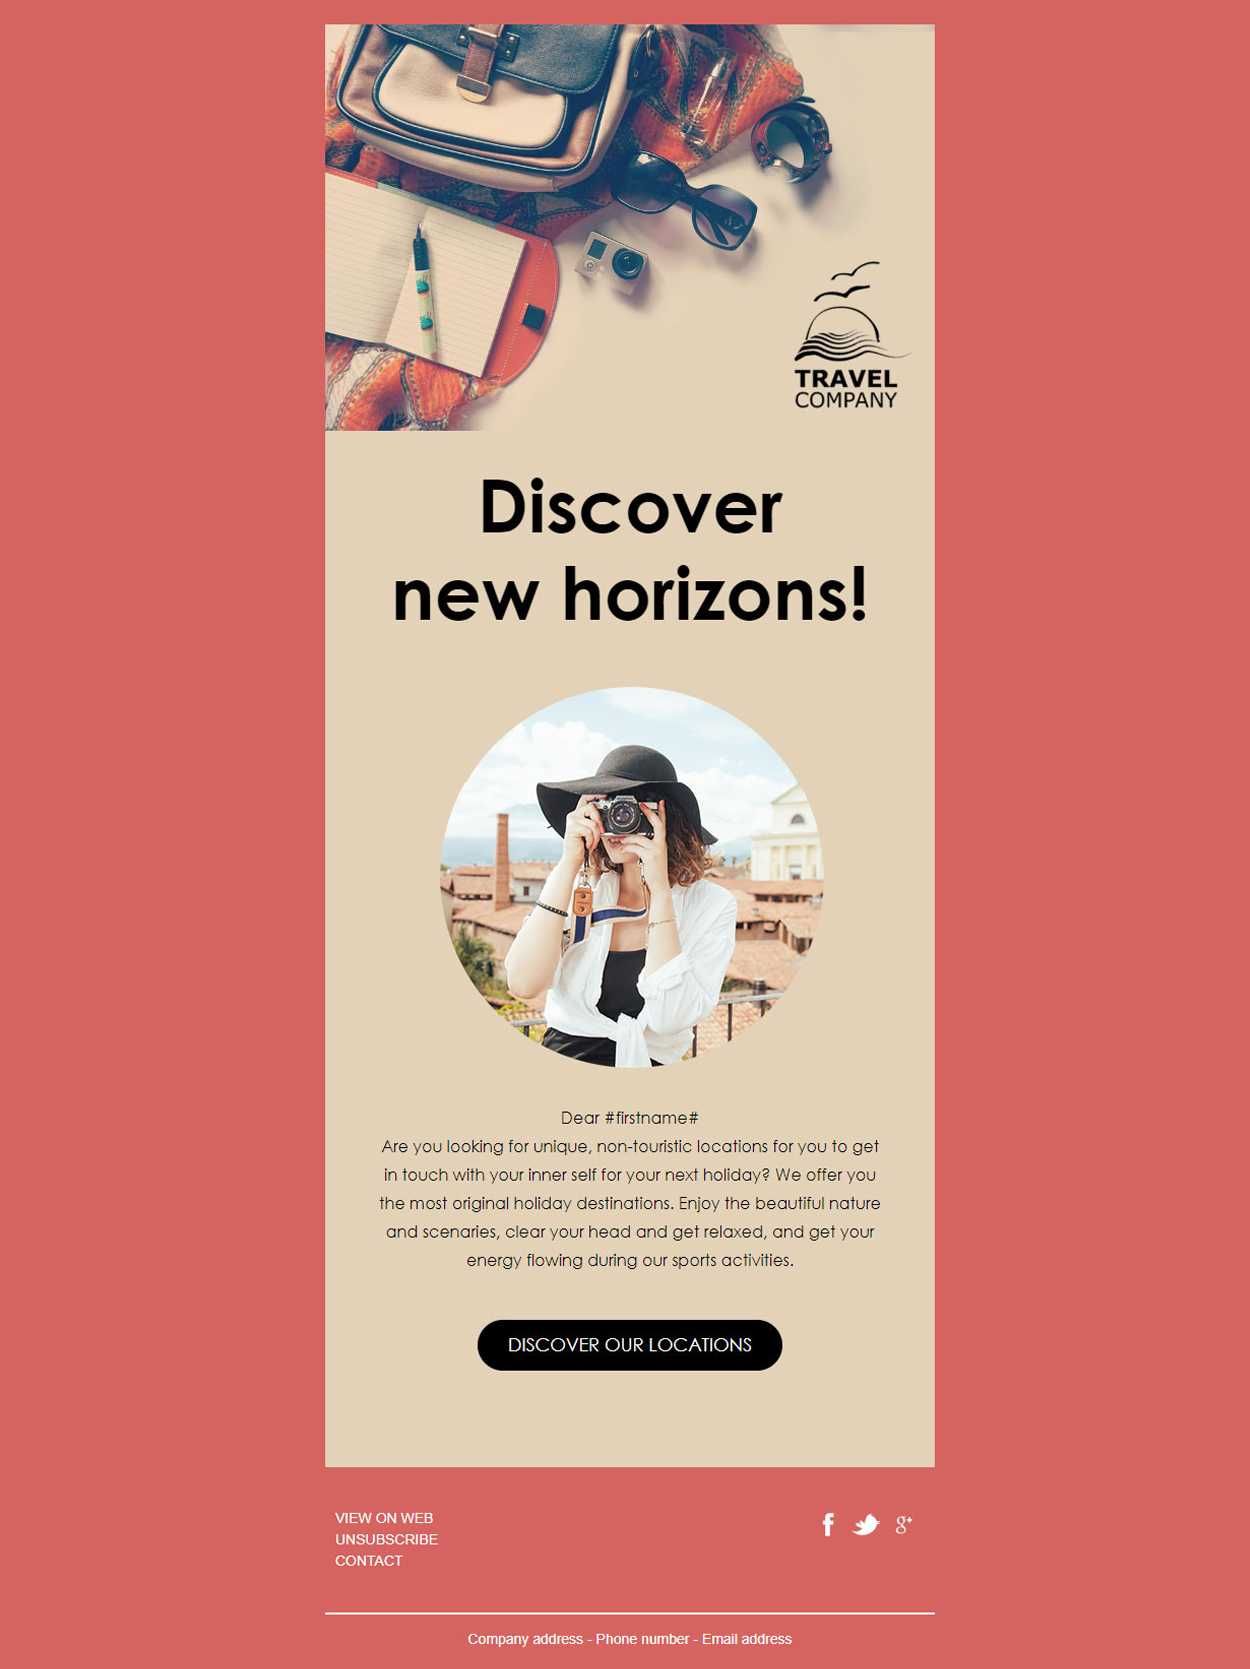 Design your own newsletter templates